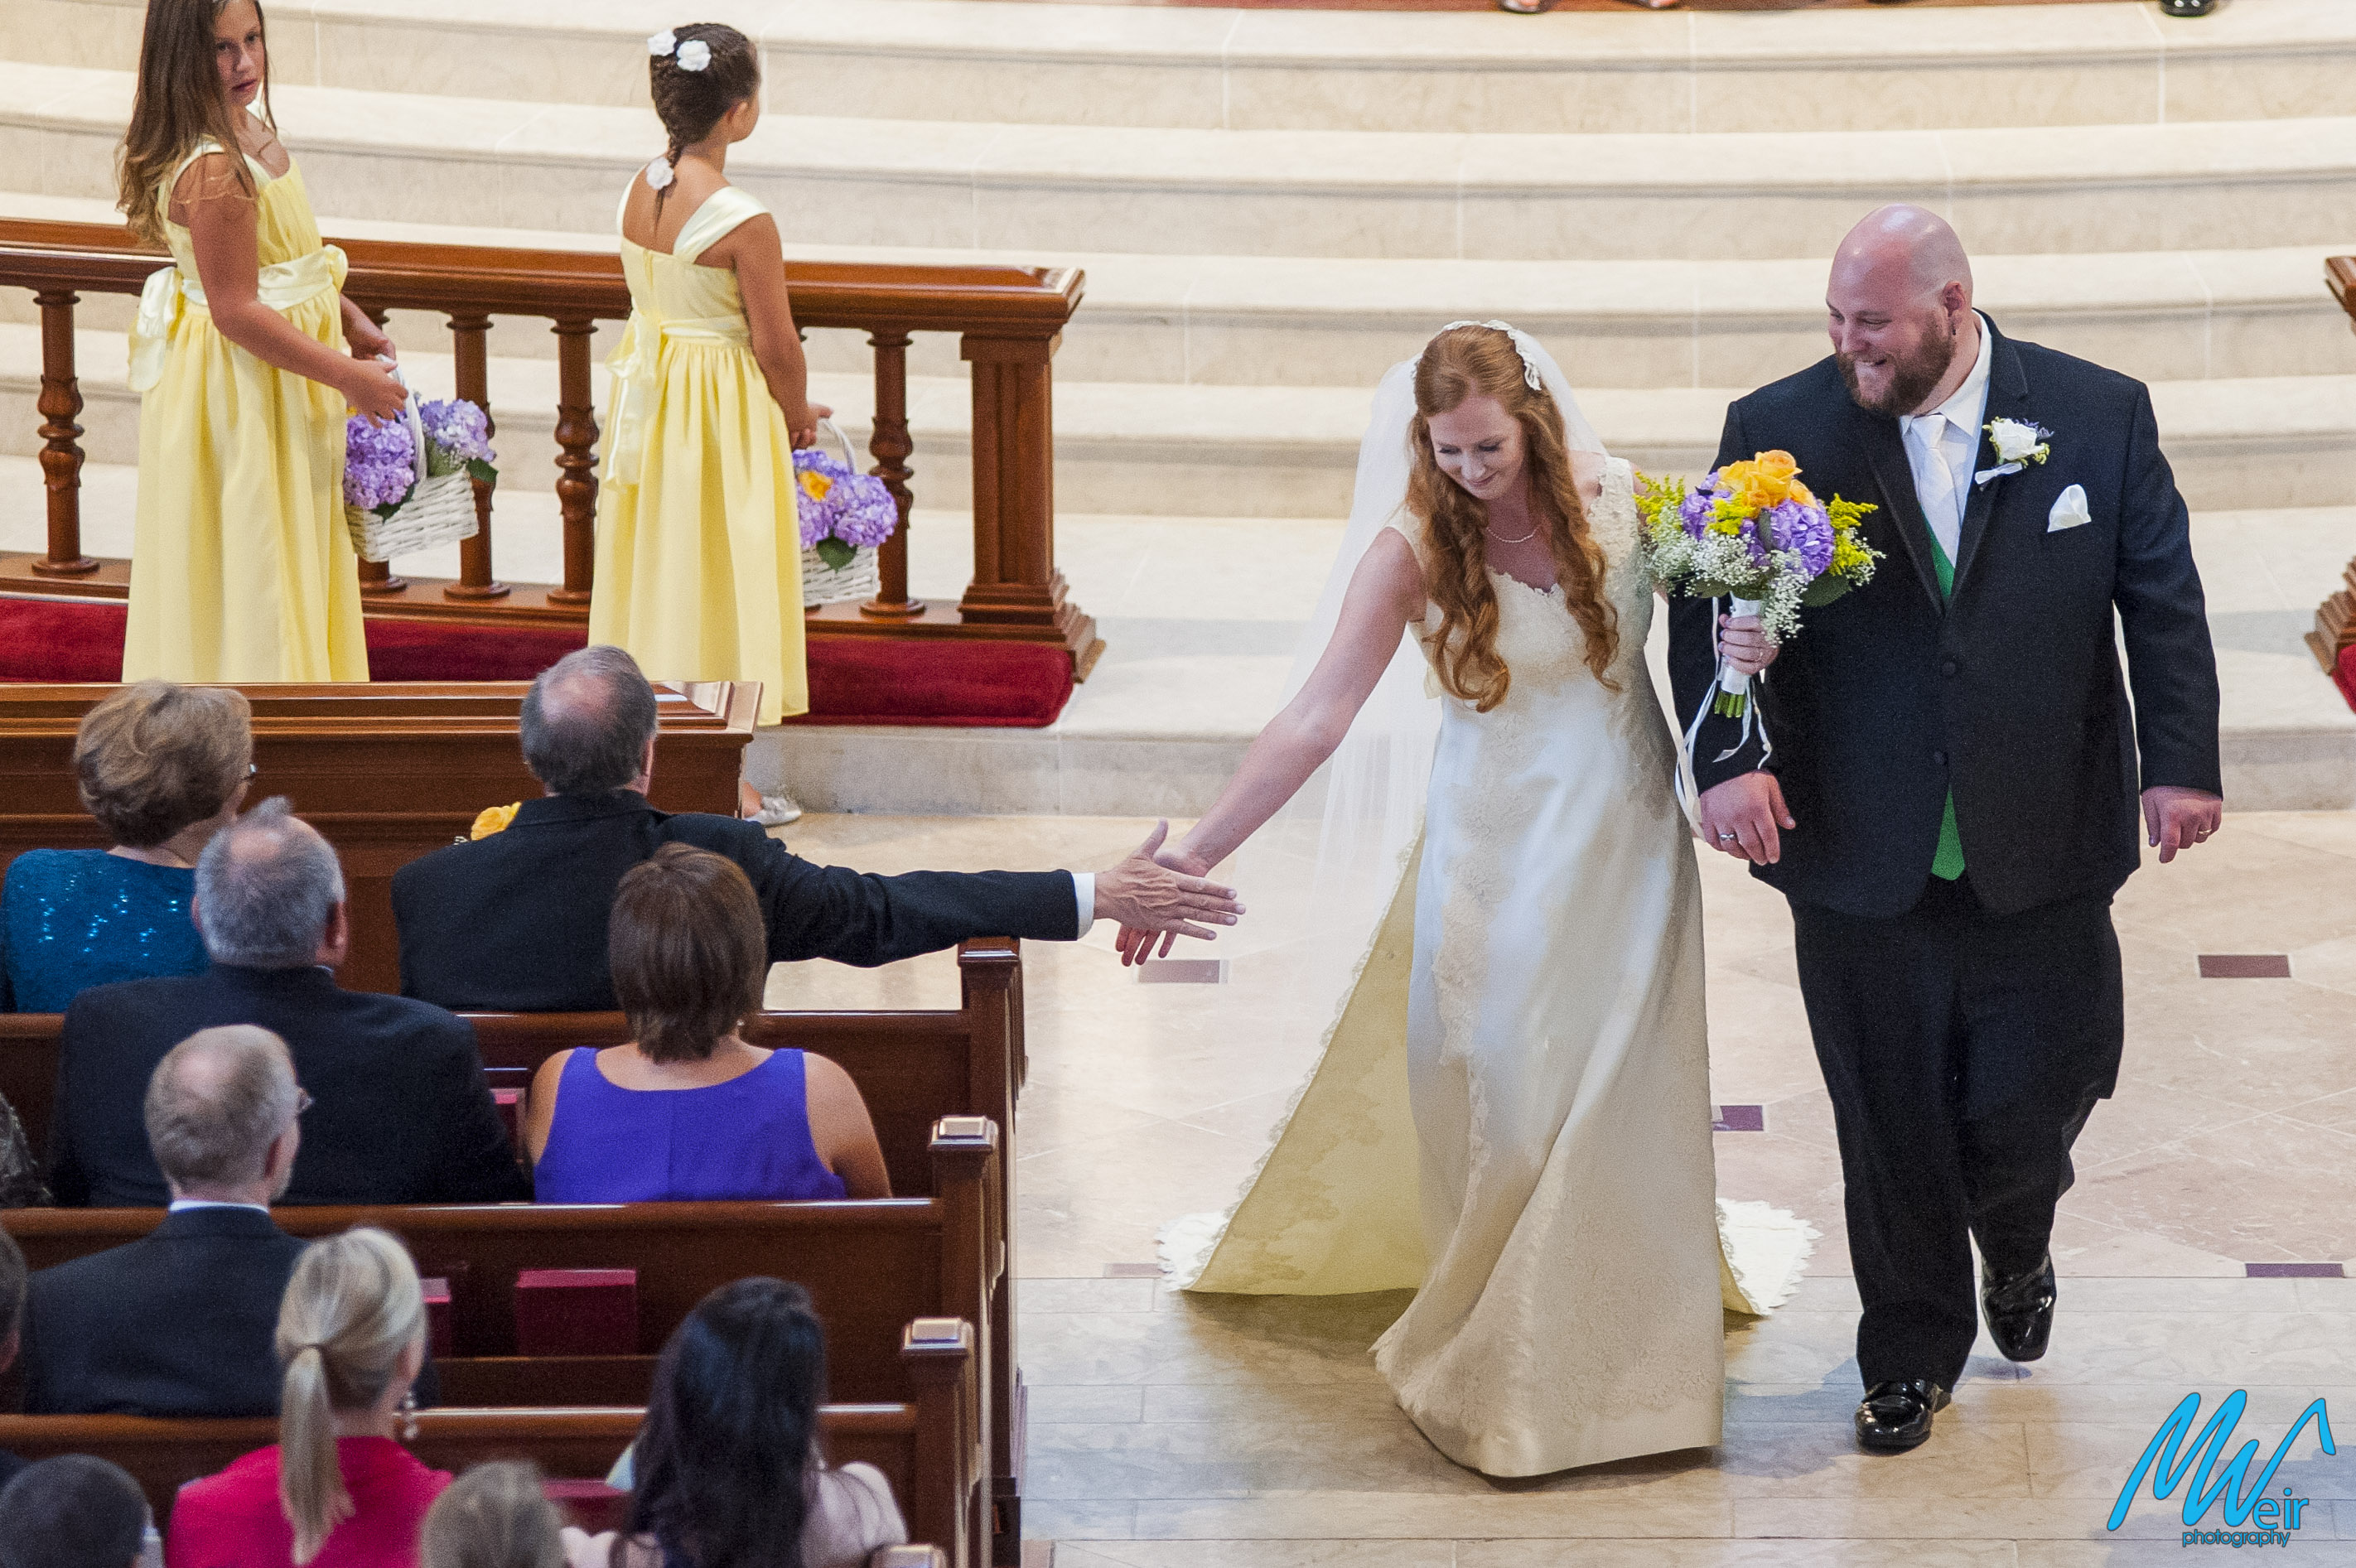 bride high fives dad on the way back up aisle after getting married